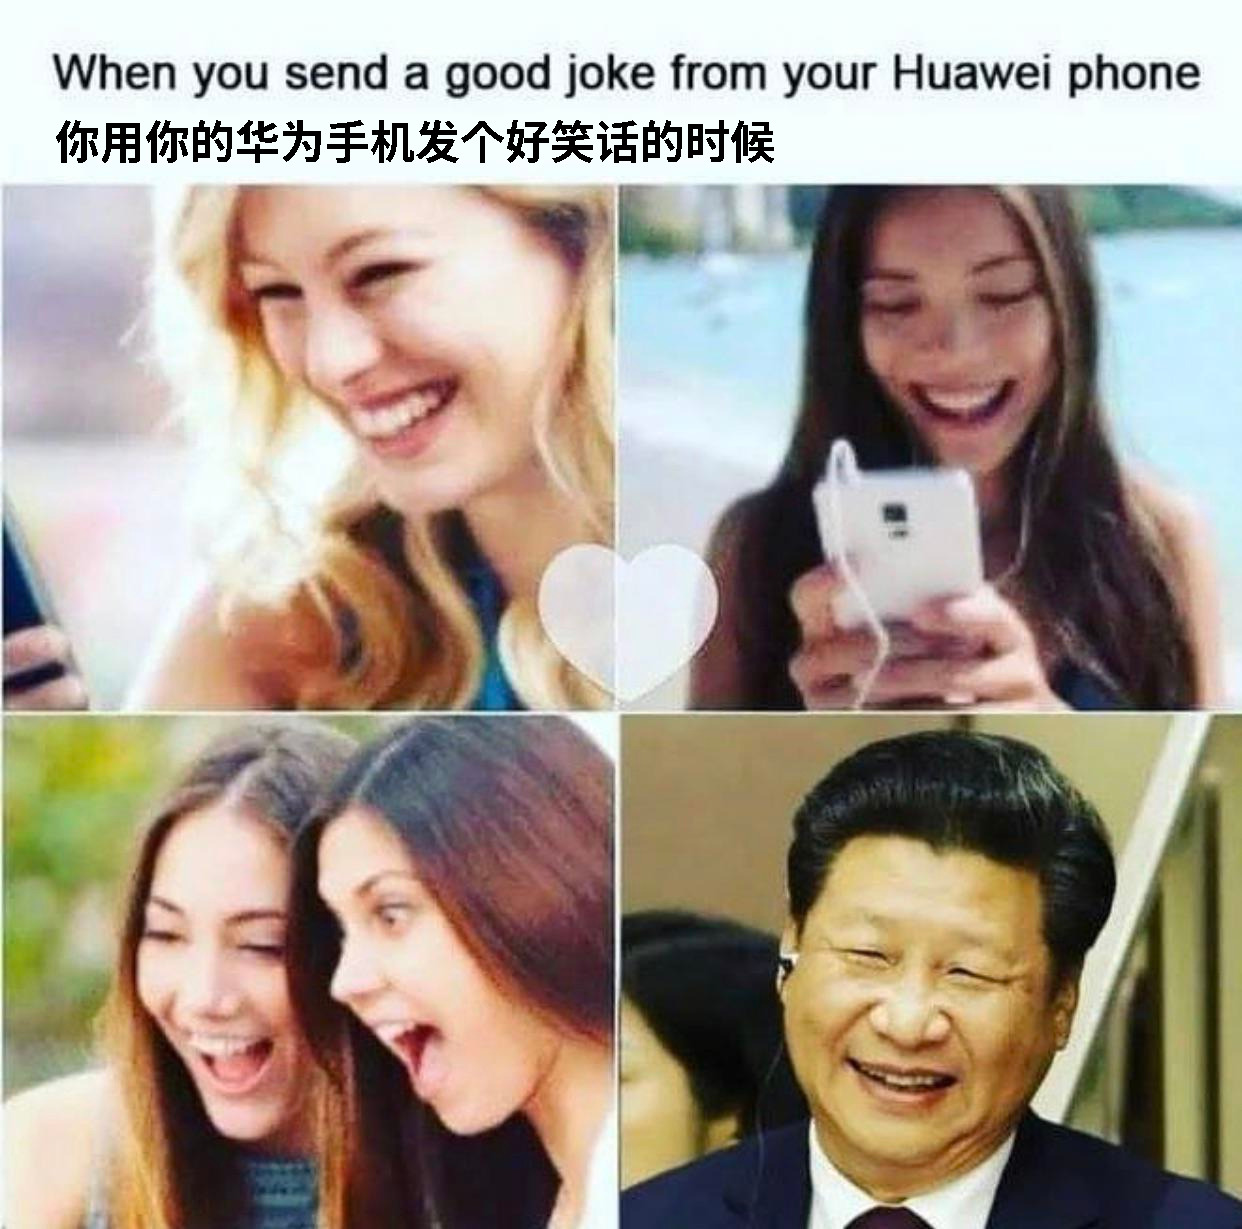 When you send a good joke from your Huawei phone